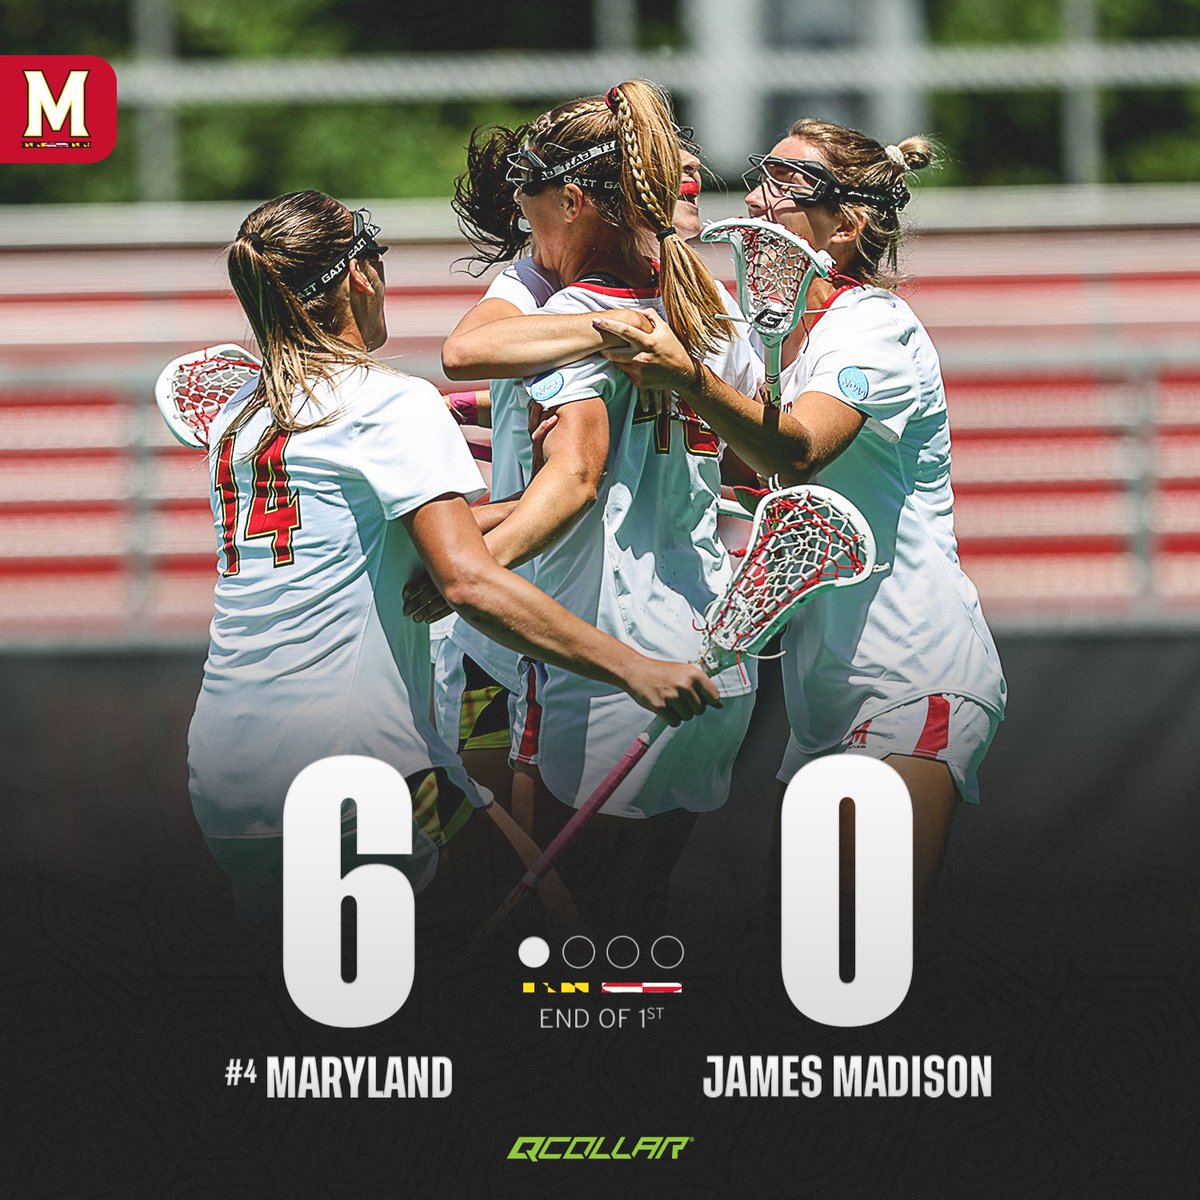 Hot start for the Terps!